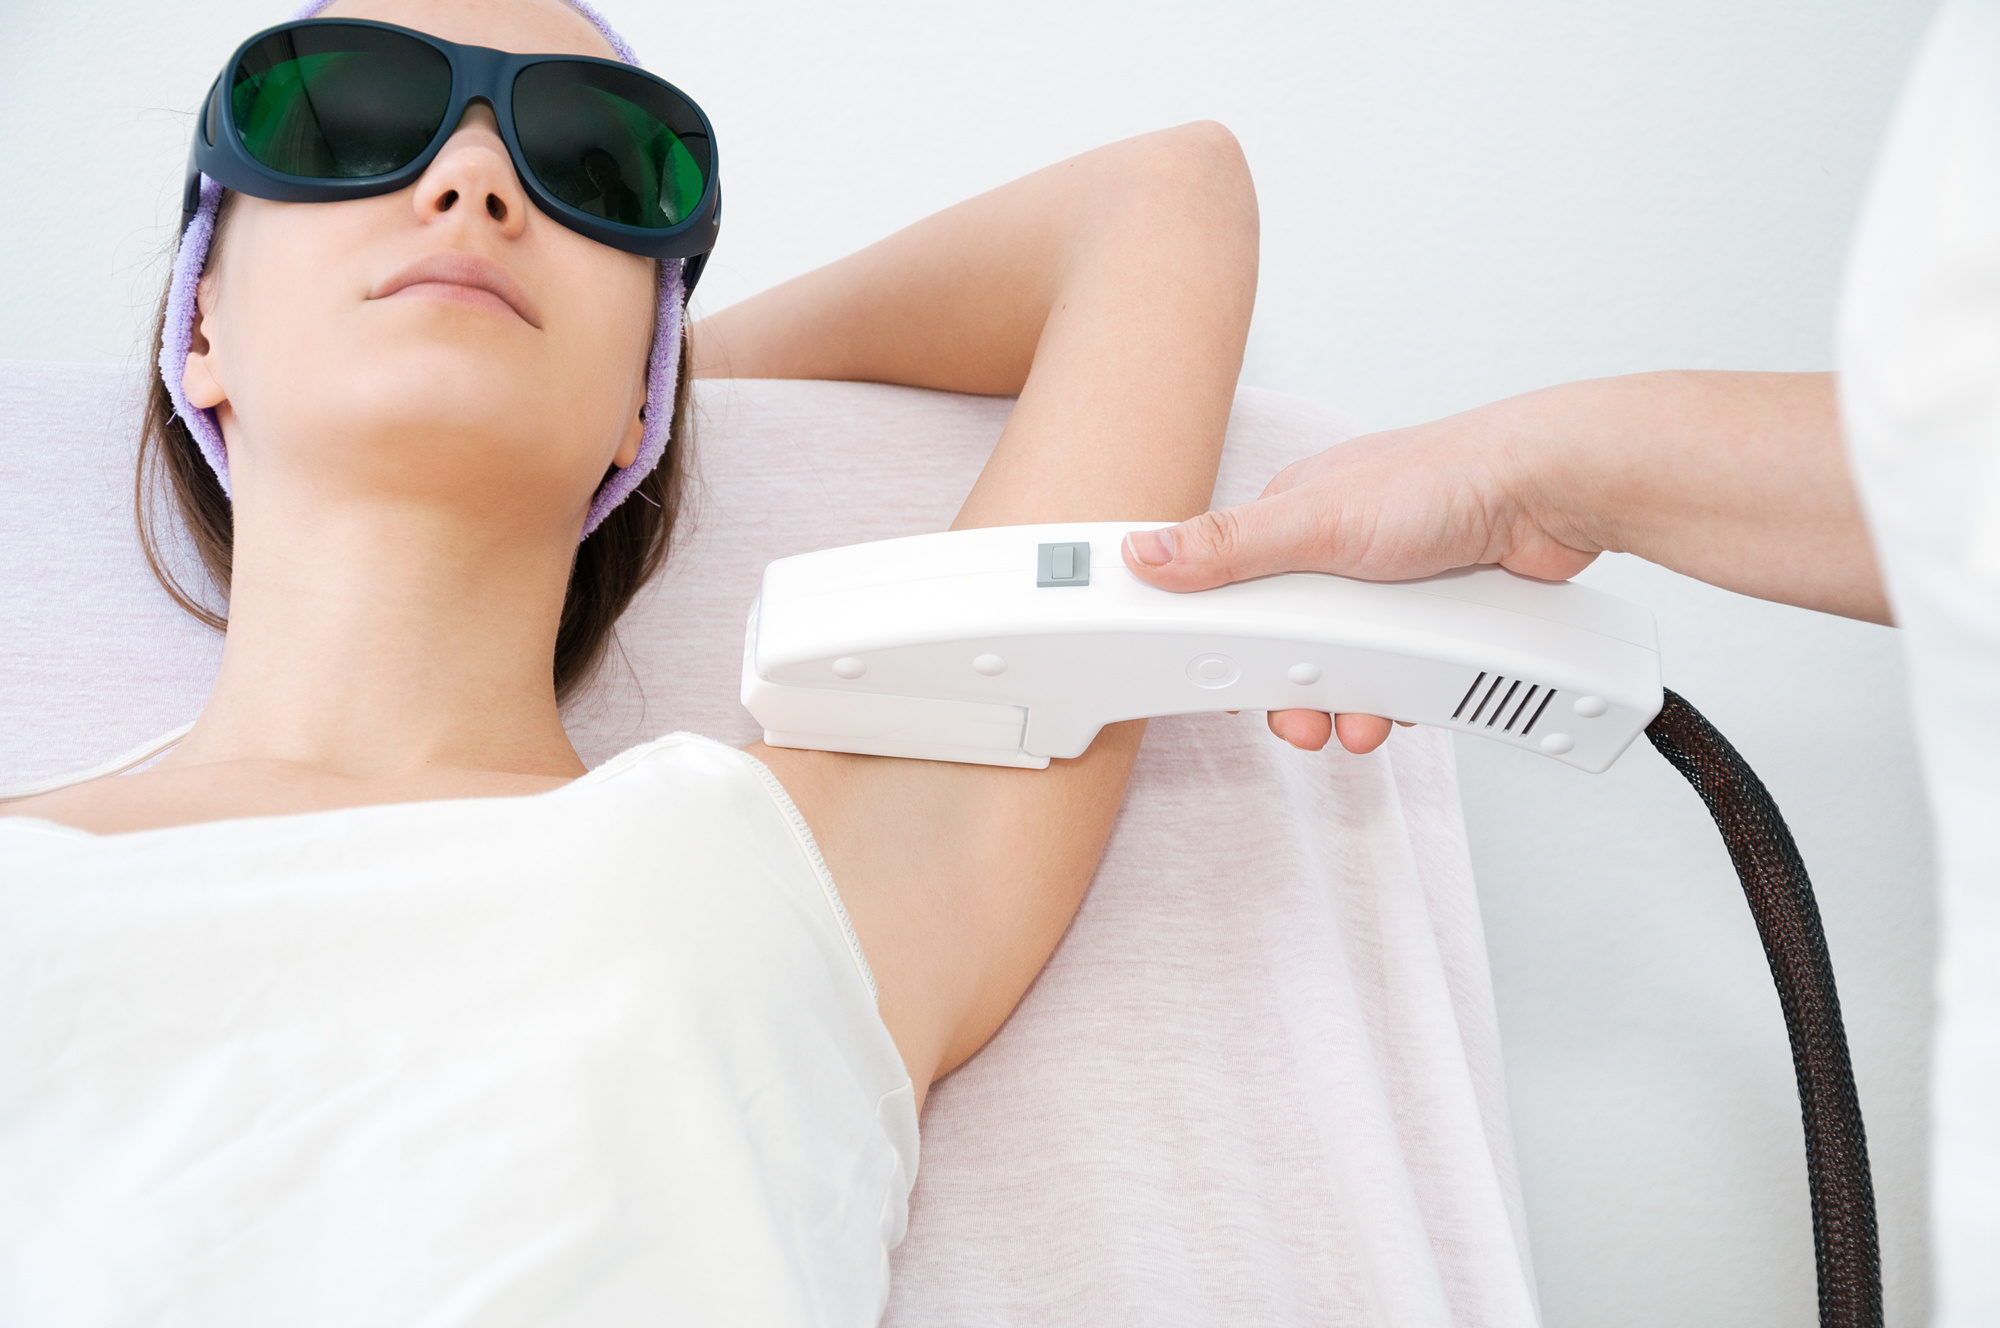 Are you thinking about getting laser hair removal? Read this article to discover the best benefits of laser hair removal!